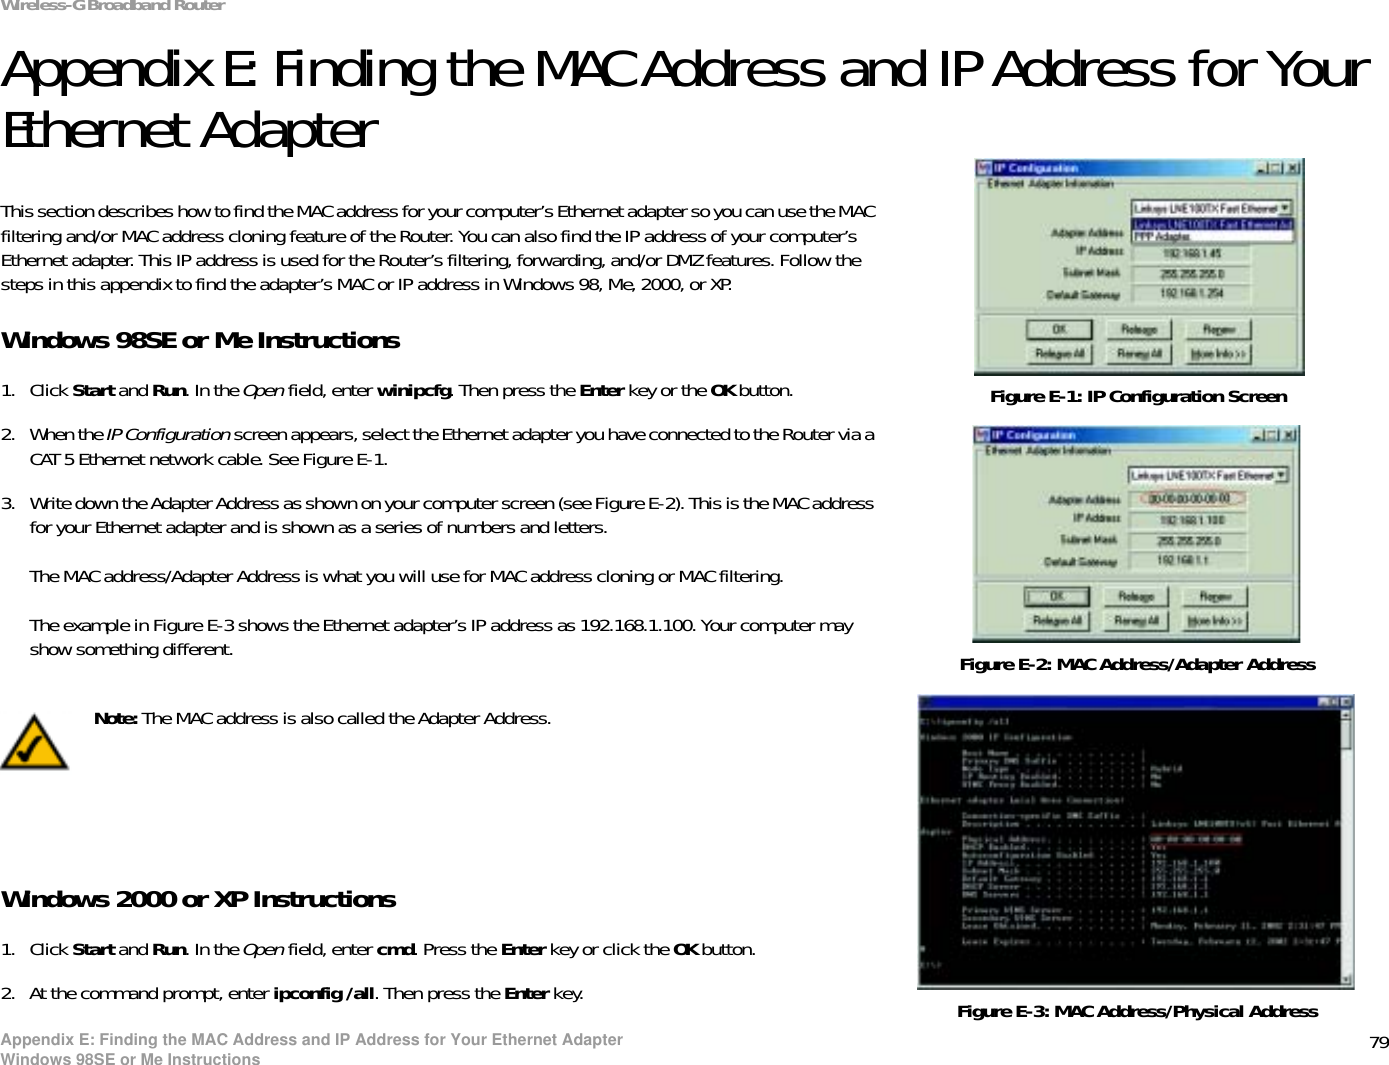 79Appendix E: Finding the MAC Address and IP Address for Your Ethernet AdapterWindows 98SE or Me InstructionsWireless-G Broadband RouterAppendix E: Finding the MAC Address and IP Address for Your Ethernet AdapterThis section describes how to find the MAC address for your computer’s Ethernet adapter so you can use the MAC filtering and/or MAC address cloning feature of the Router. You can also find the IP address of your computer’s Ethernet adapter. This IP address is used for the Router’s filtering, forwarding, and/or DMZ features. Follow the steps in this appendix to find the adapter’s MAC or IP address in Windows 98, Me, 2000, or XP.Windows 98SE or Me Instructions1. Click Start and Run. In the Open field, enter winipcfg. Then press the Enter key or the OK button. 2. When the IP Configuration screen appears, select the Ethernet adapter you have connected to the Router via a CAT 5 Ethernet network cable. See Figure E-1.3. Write down the Adapter Address as shown on your computer screen (see Figure E-2). This is the MAC address for your Ethernet adapter and is shown as a series of numbers and letters.The MAC address/Adapter Address is what you will use for MAC address cloning or MAC filtering.The example in Figure E-3 shows the Ethernet adapter’s IP address as 192.168.1.100. Your computer may show something different.Windows 2000 or XP Instructions1. Click Start and Run. In the Open field, enter cmd. Press the Enter key or click the OK button.2. At the command prompt, enter ipconfig /all. Then press the Enter key.Figure E-2: MAC Address/Adapter AddressFigure E-1: IP Configuration ScreenNote: The MAC address is also called the Adapter Address.Figure E-3: MAC Address/Physical Address